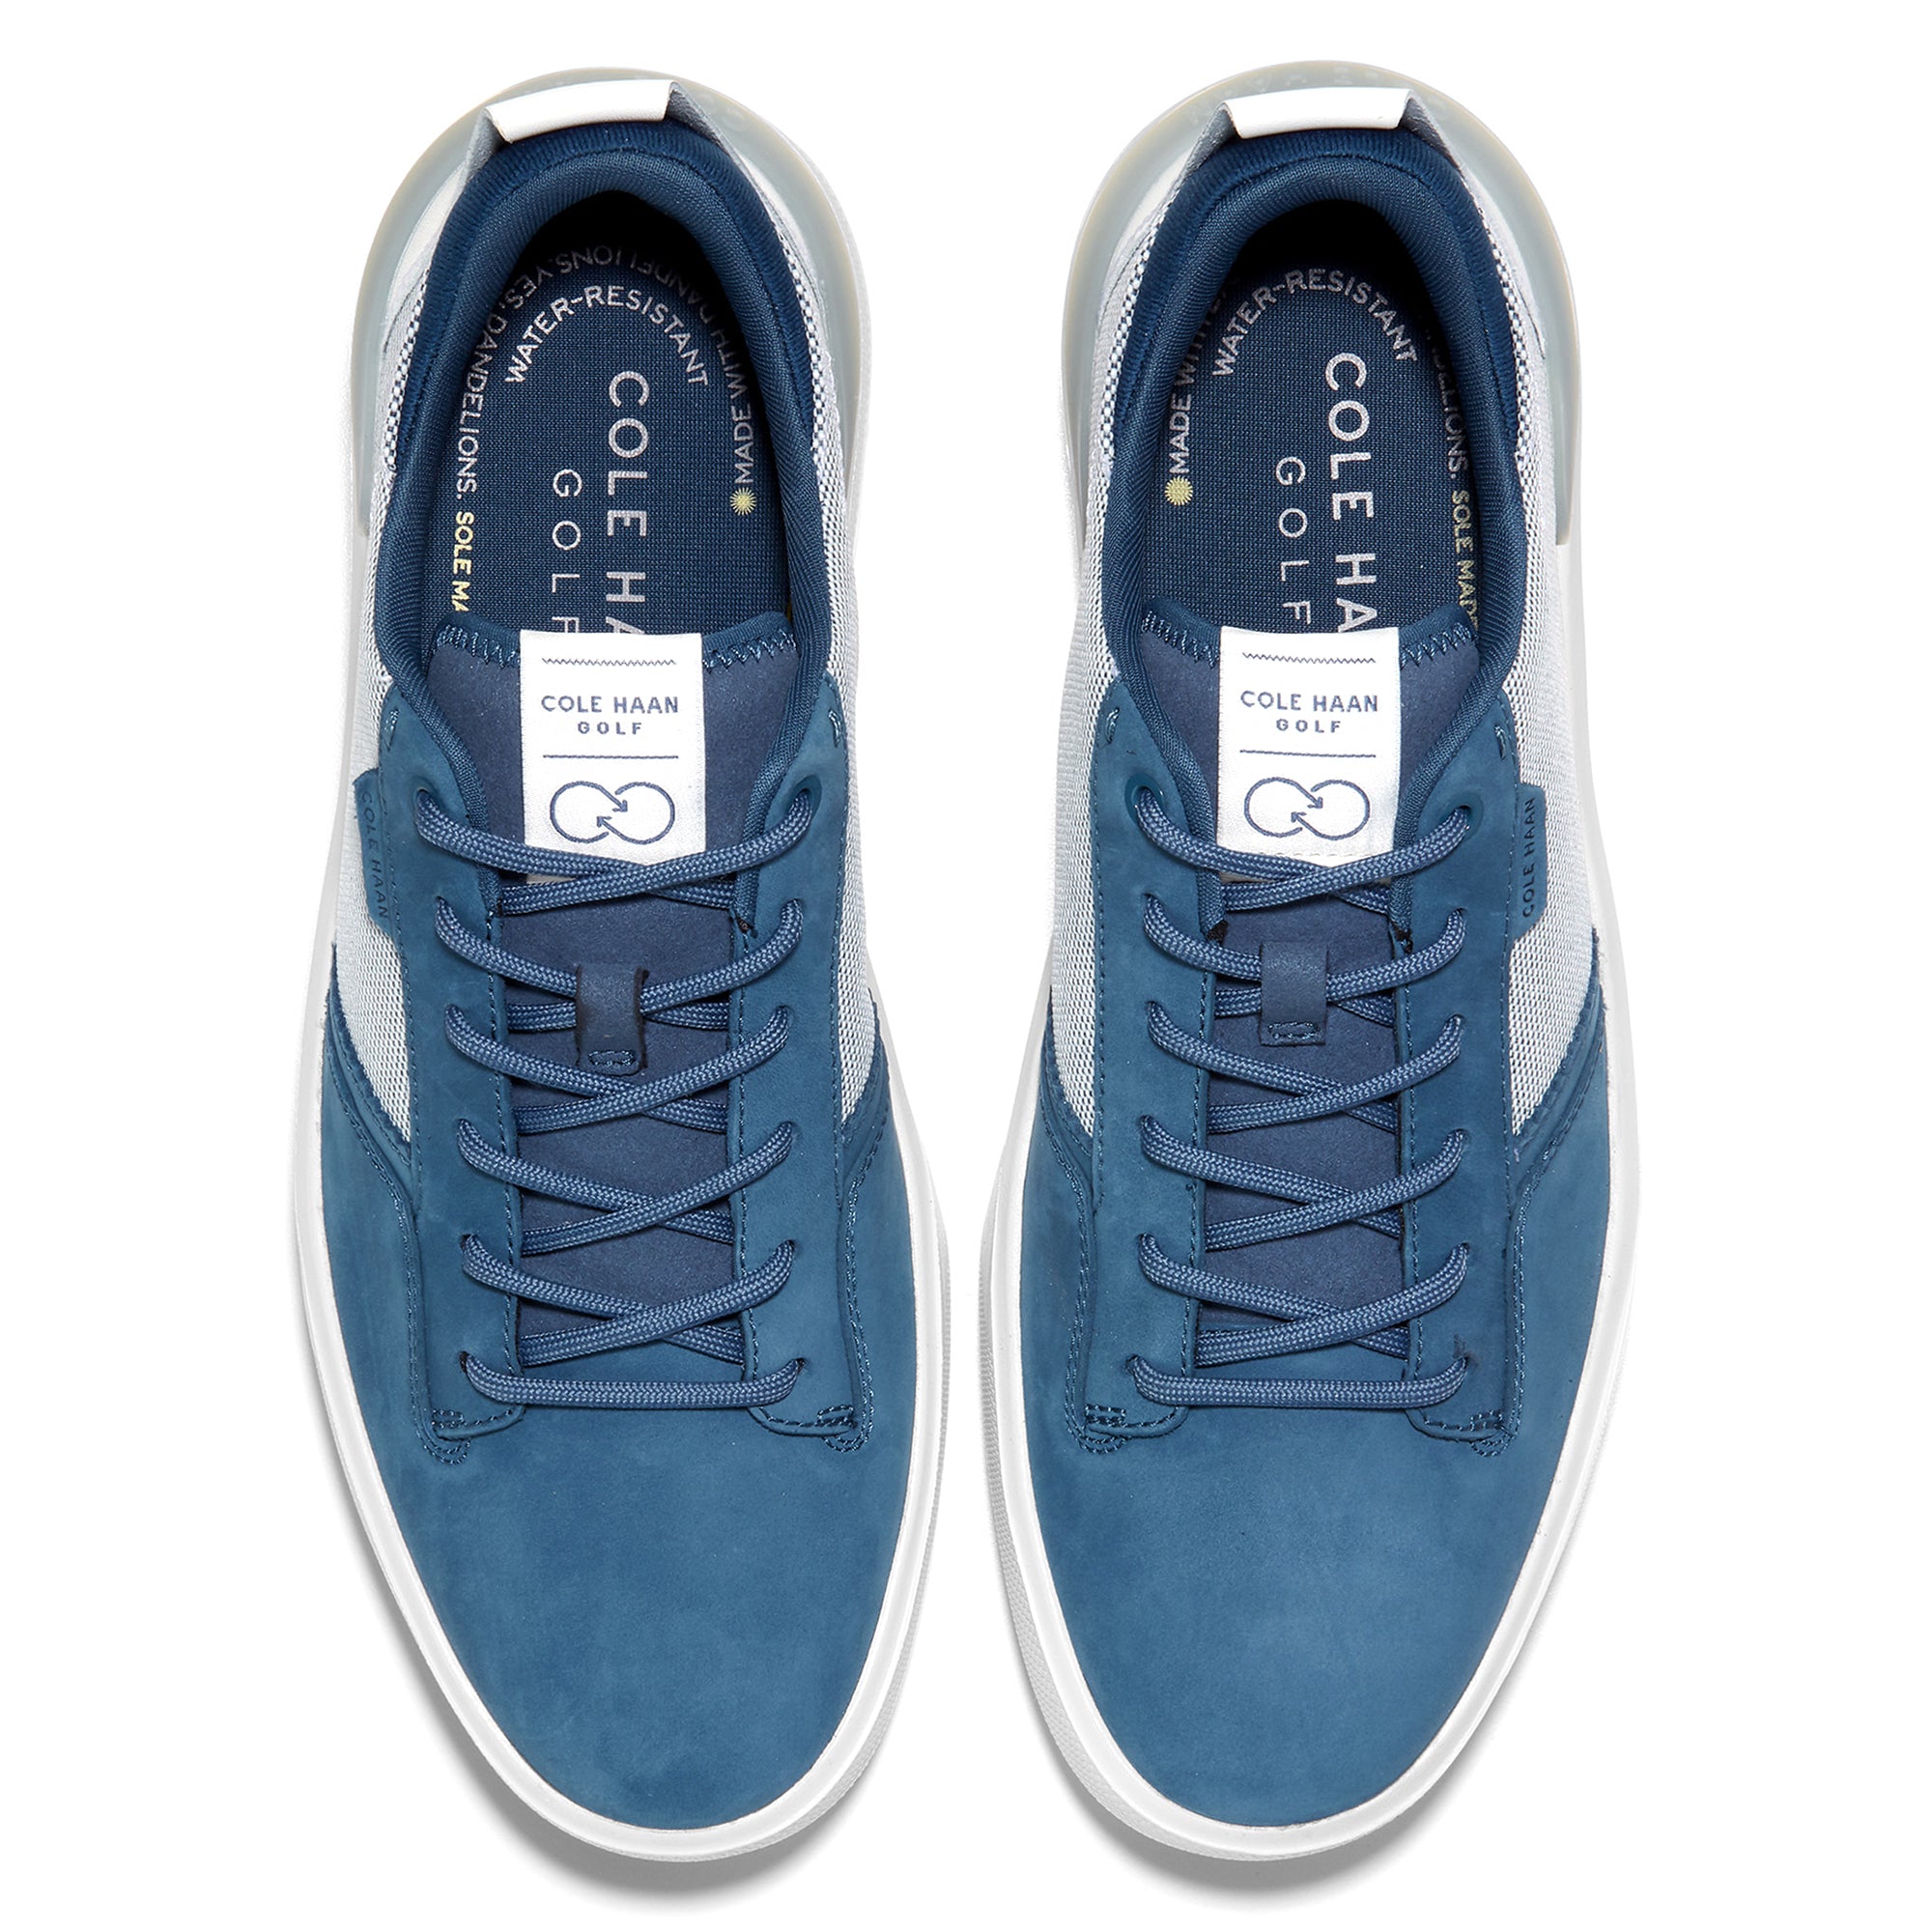 cole-haan-grandpro-crew-golf-shoes-c36794-ensign-blue-optic-white-micro-chip